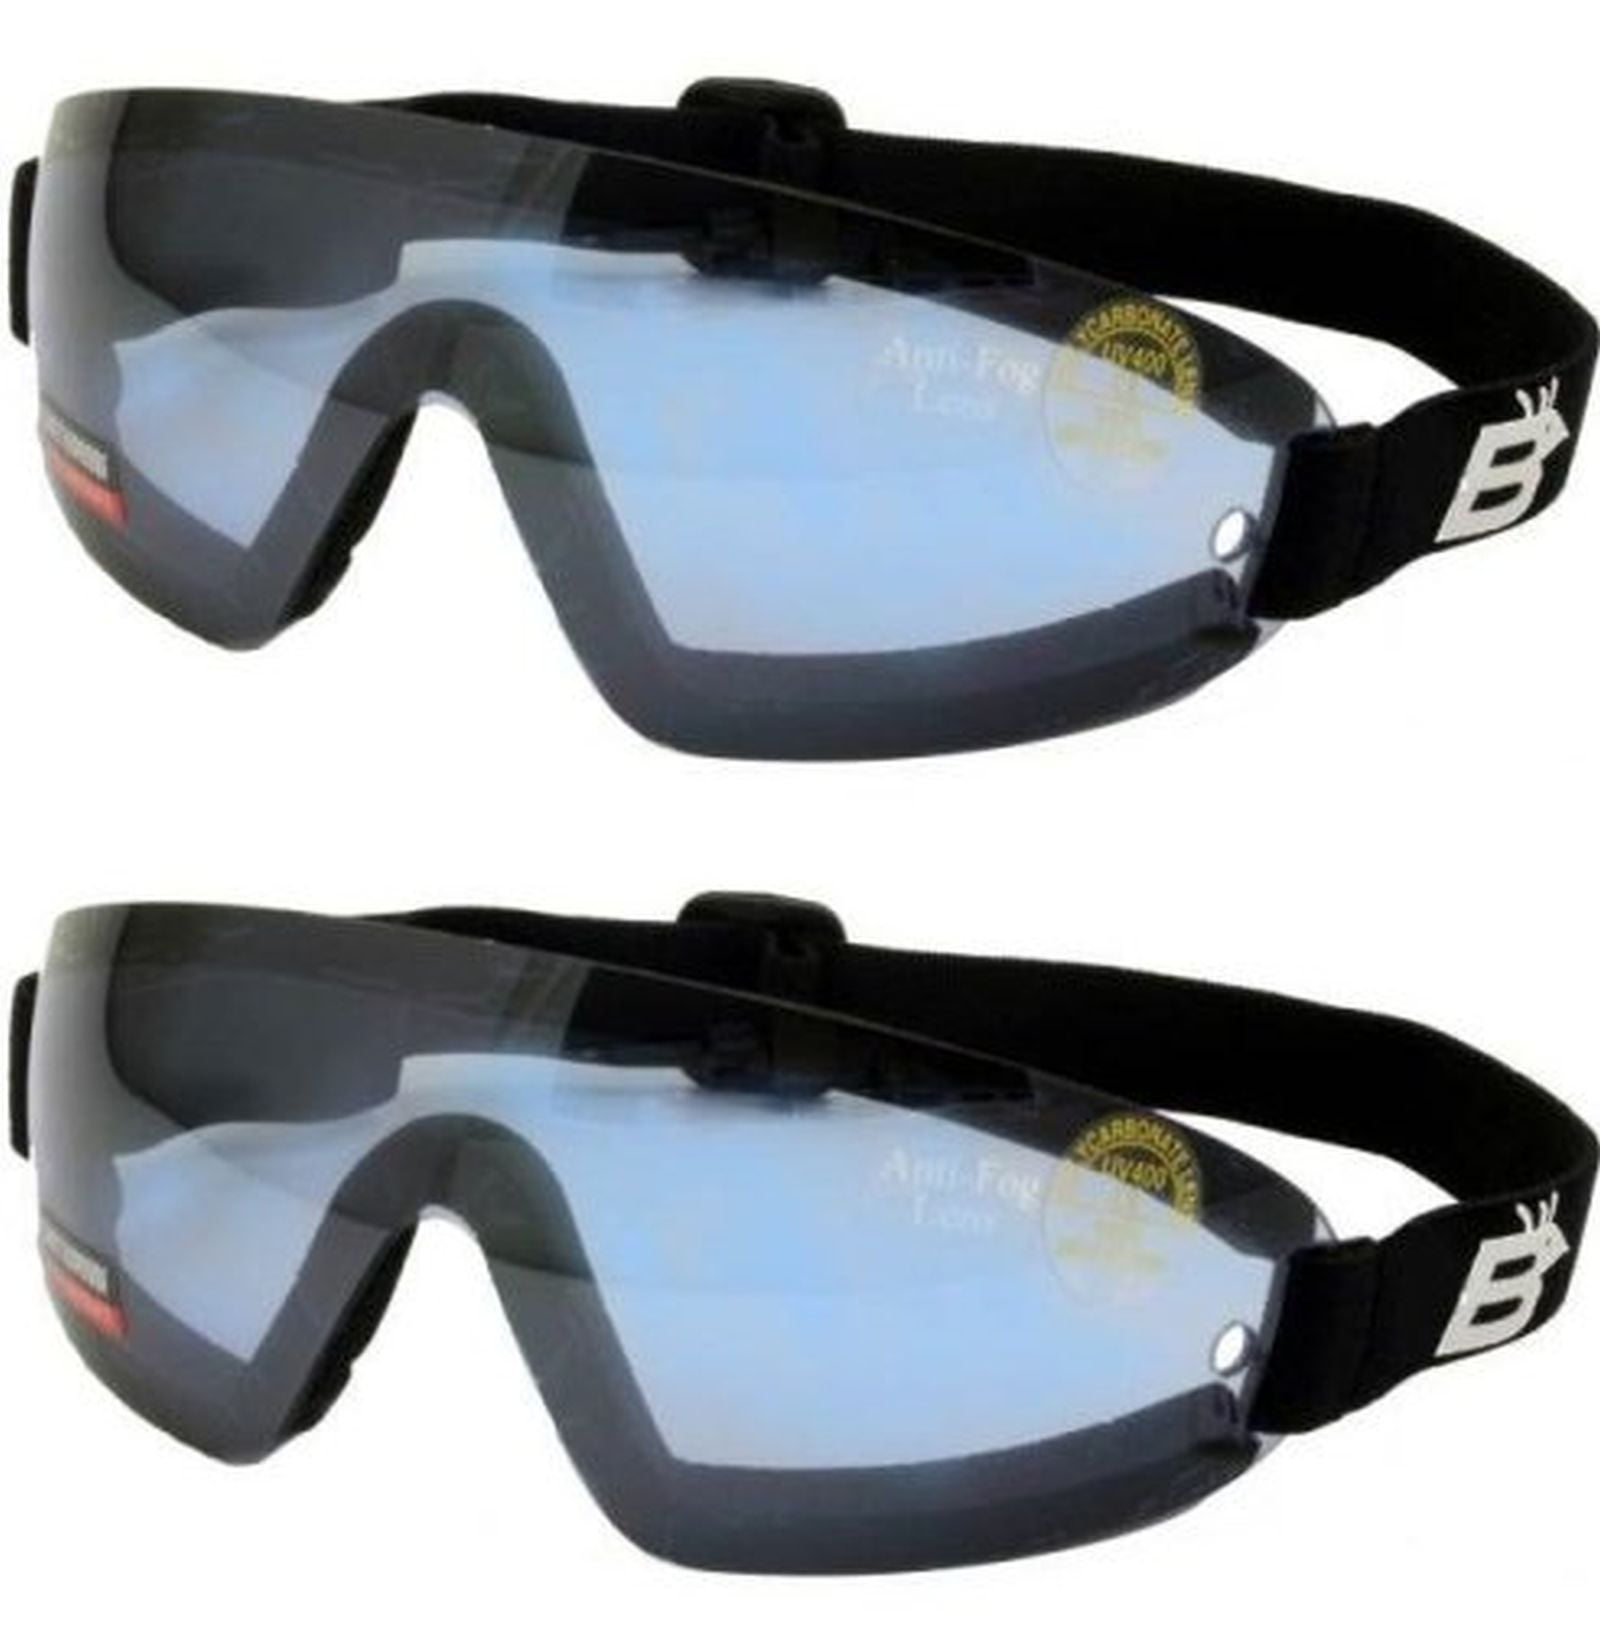 1 Clear & 1 G-Tech Tinted pairs of Goggles 4 Freefall Skydiving & Paragliding 